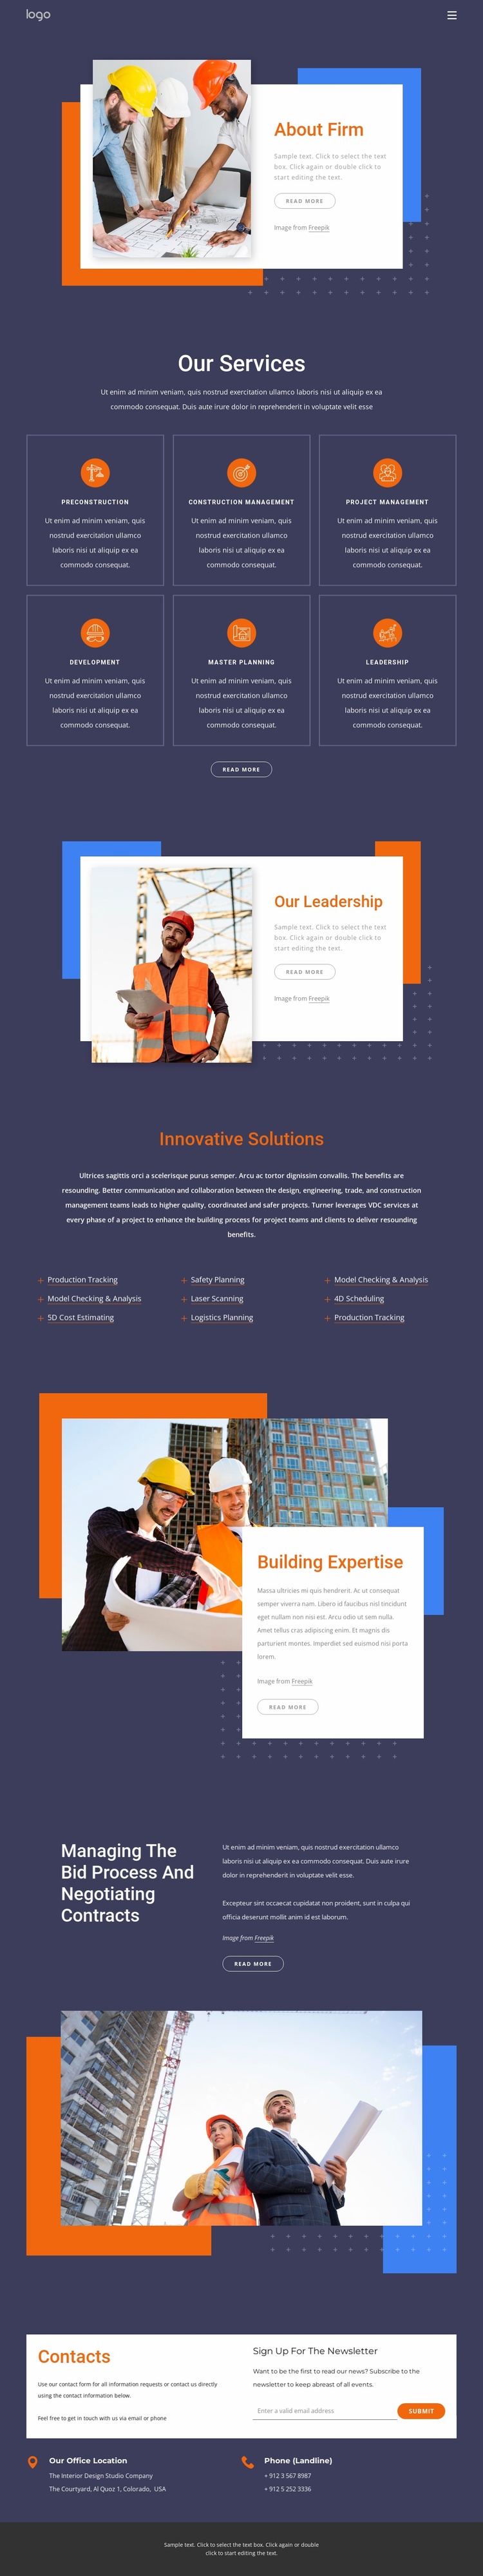 We build the structures and infrastructure Ecommerce Website Design